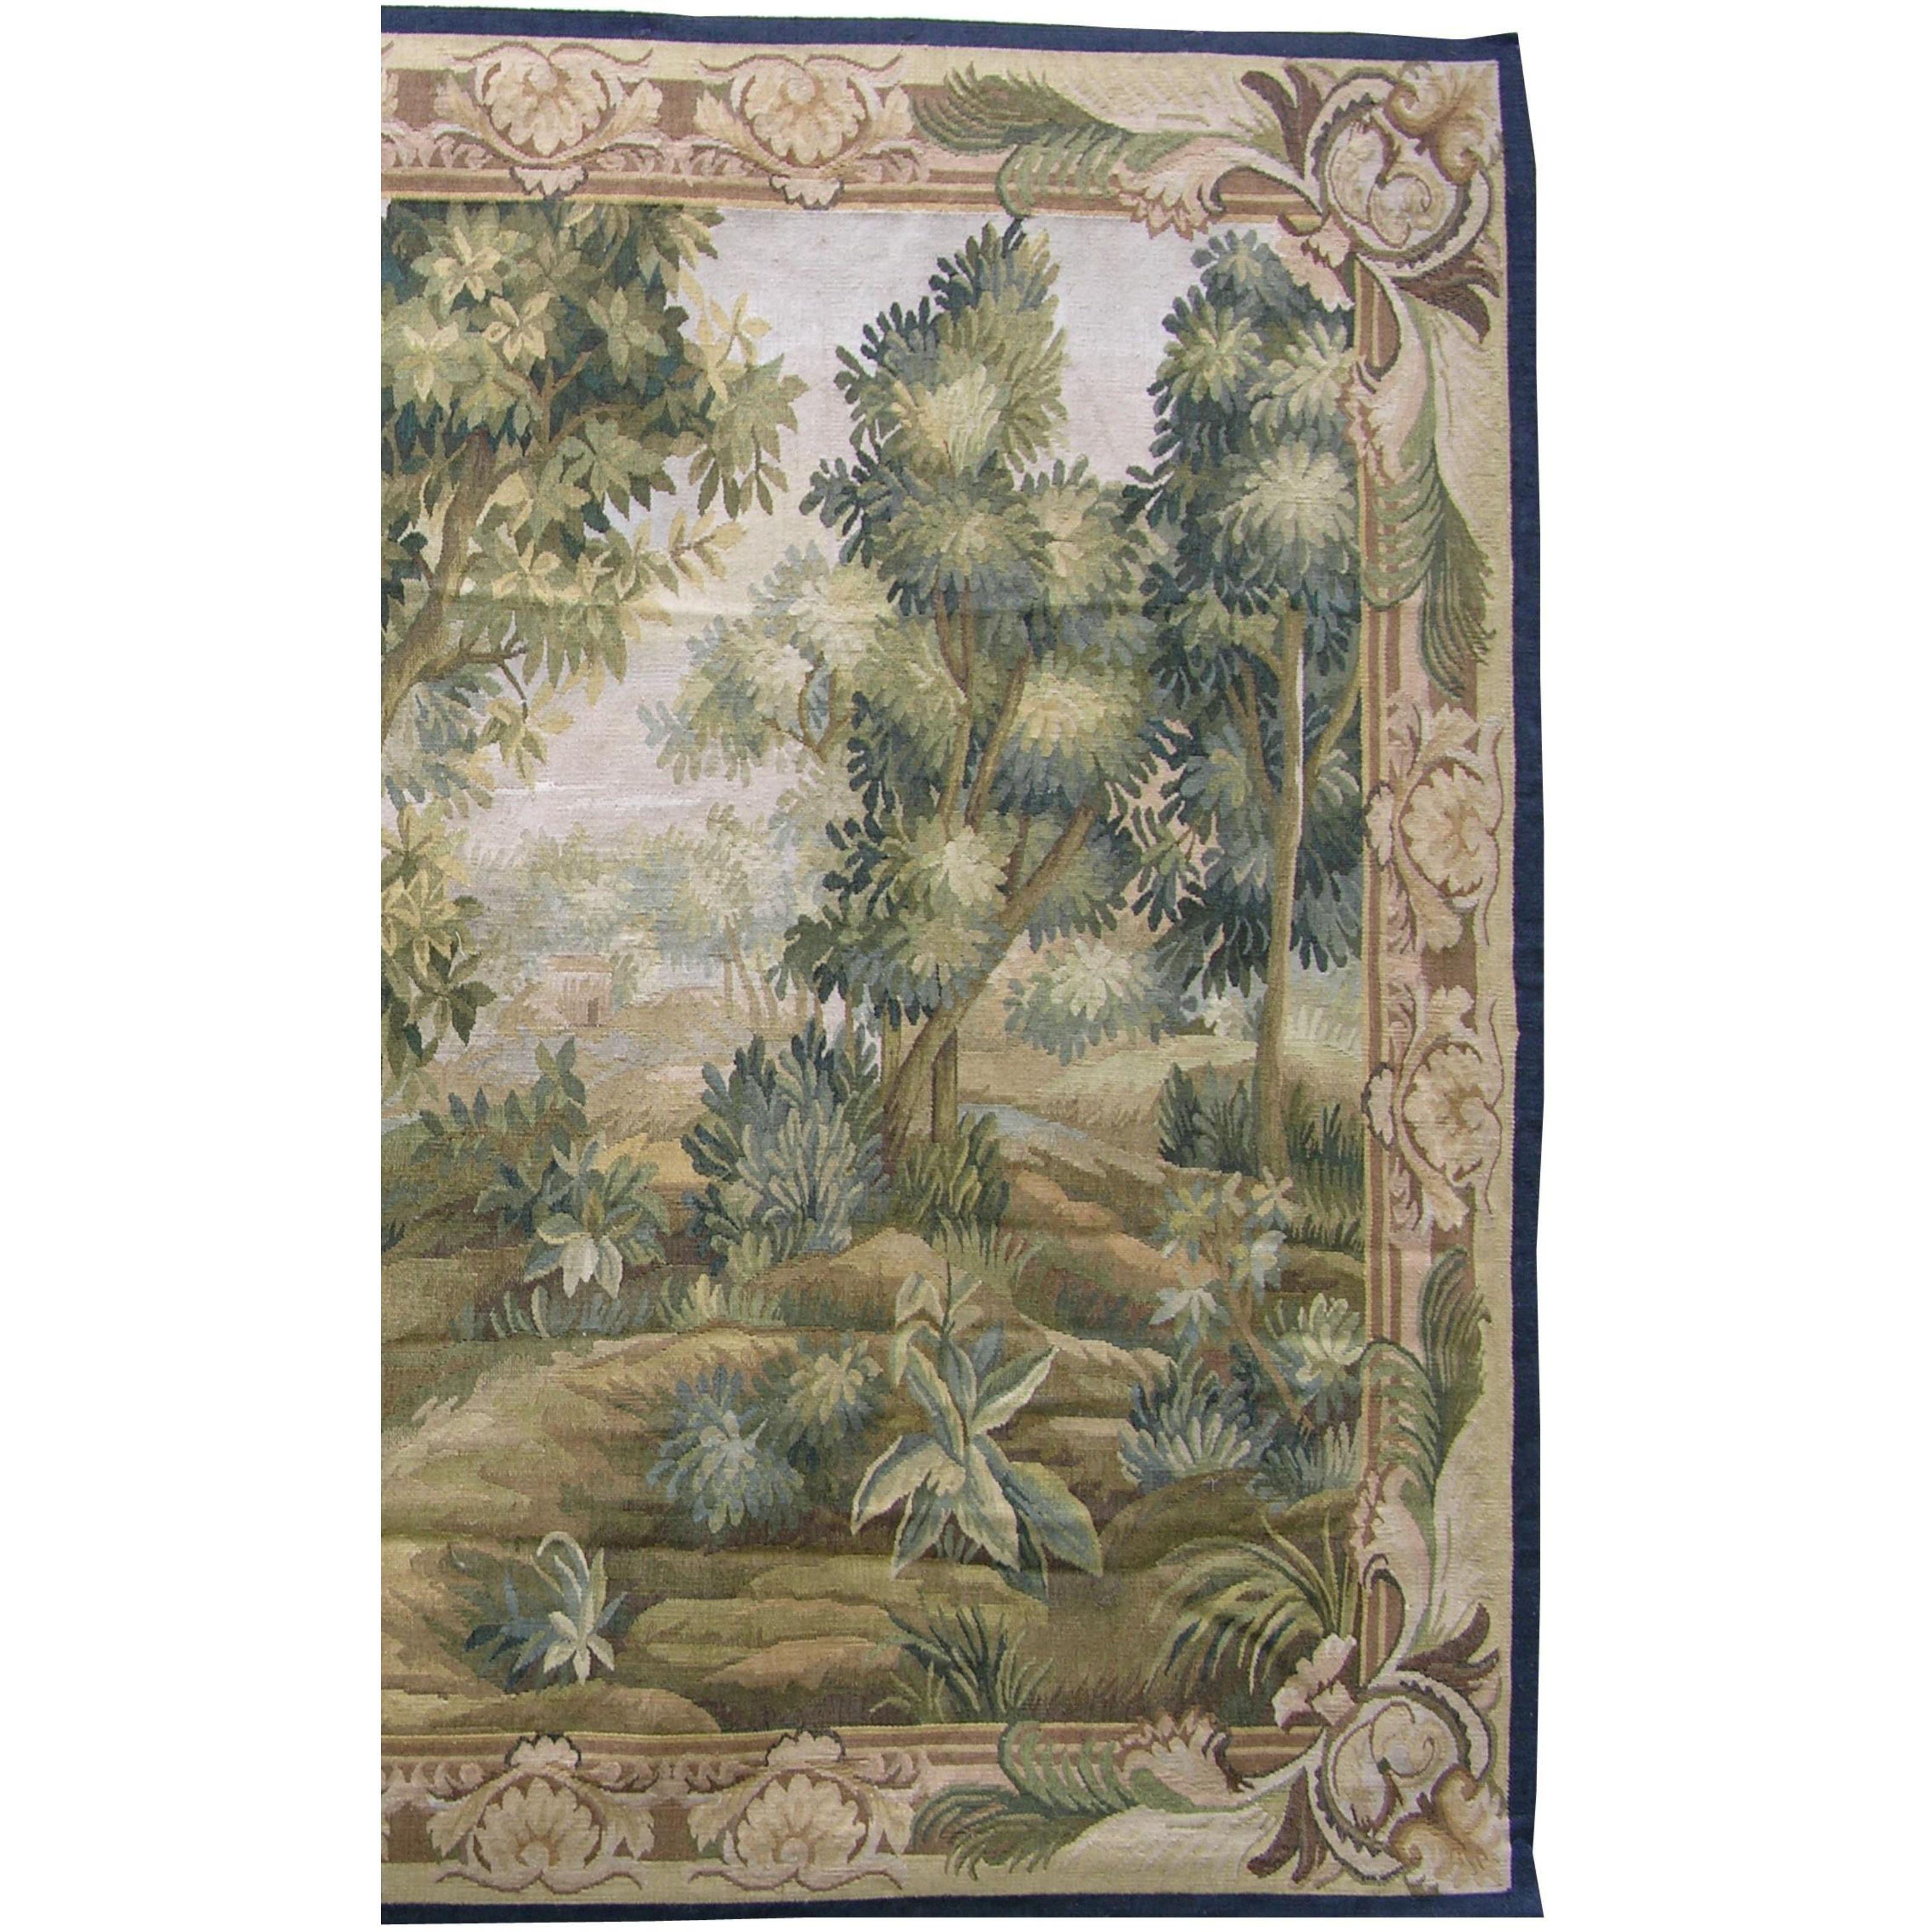 Unknown Vintage Tapestry Depicting a Hidden Forest 5'5